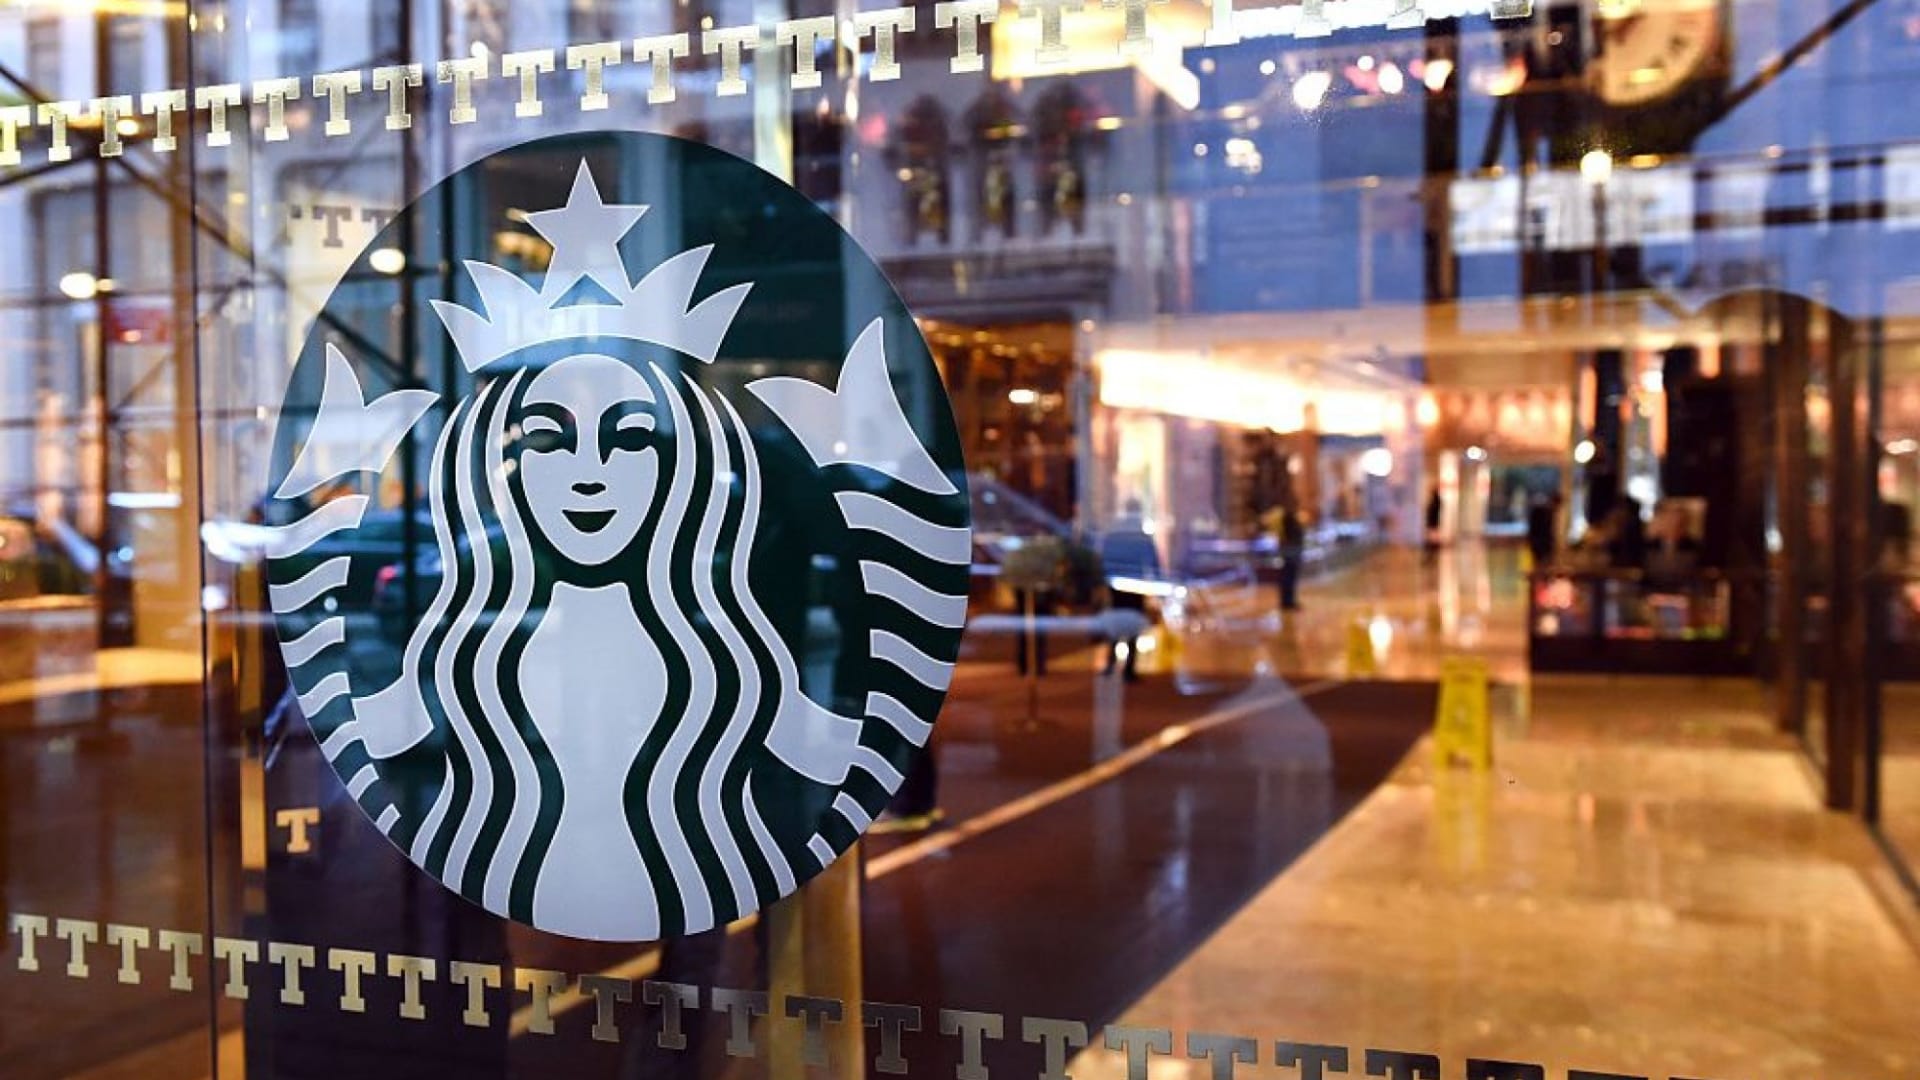 Starbucks' Black Friday Deal Made People Very Angry. It's What No Company Should Ever Do